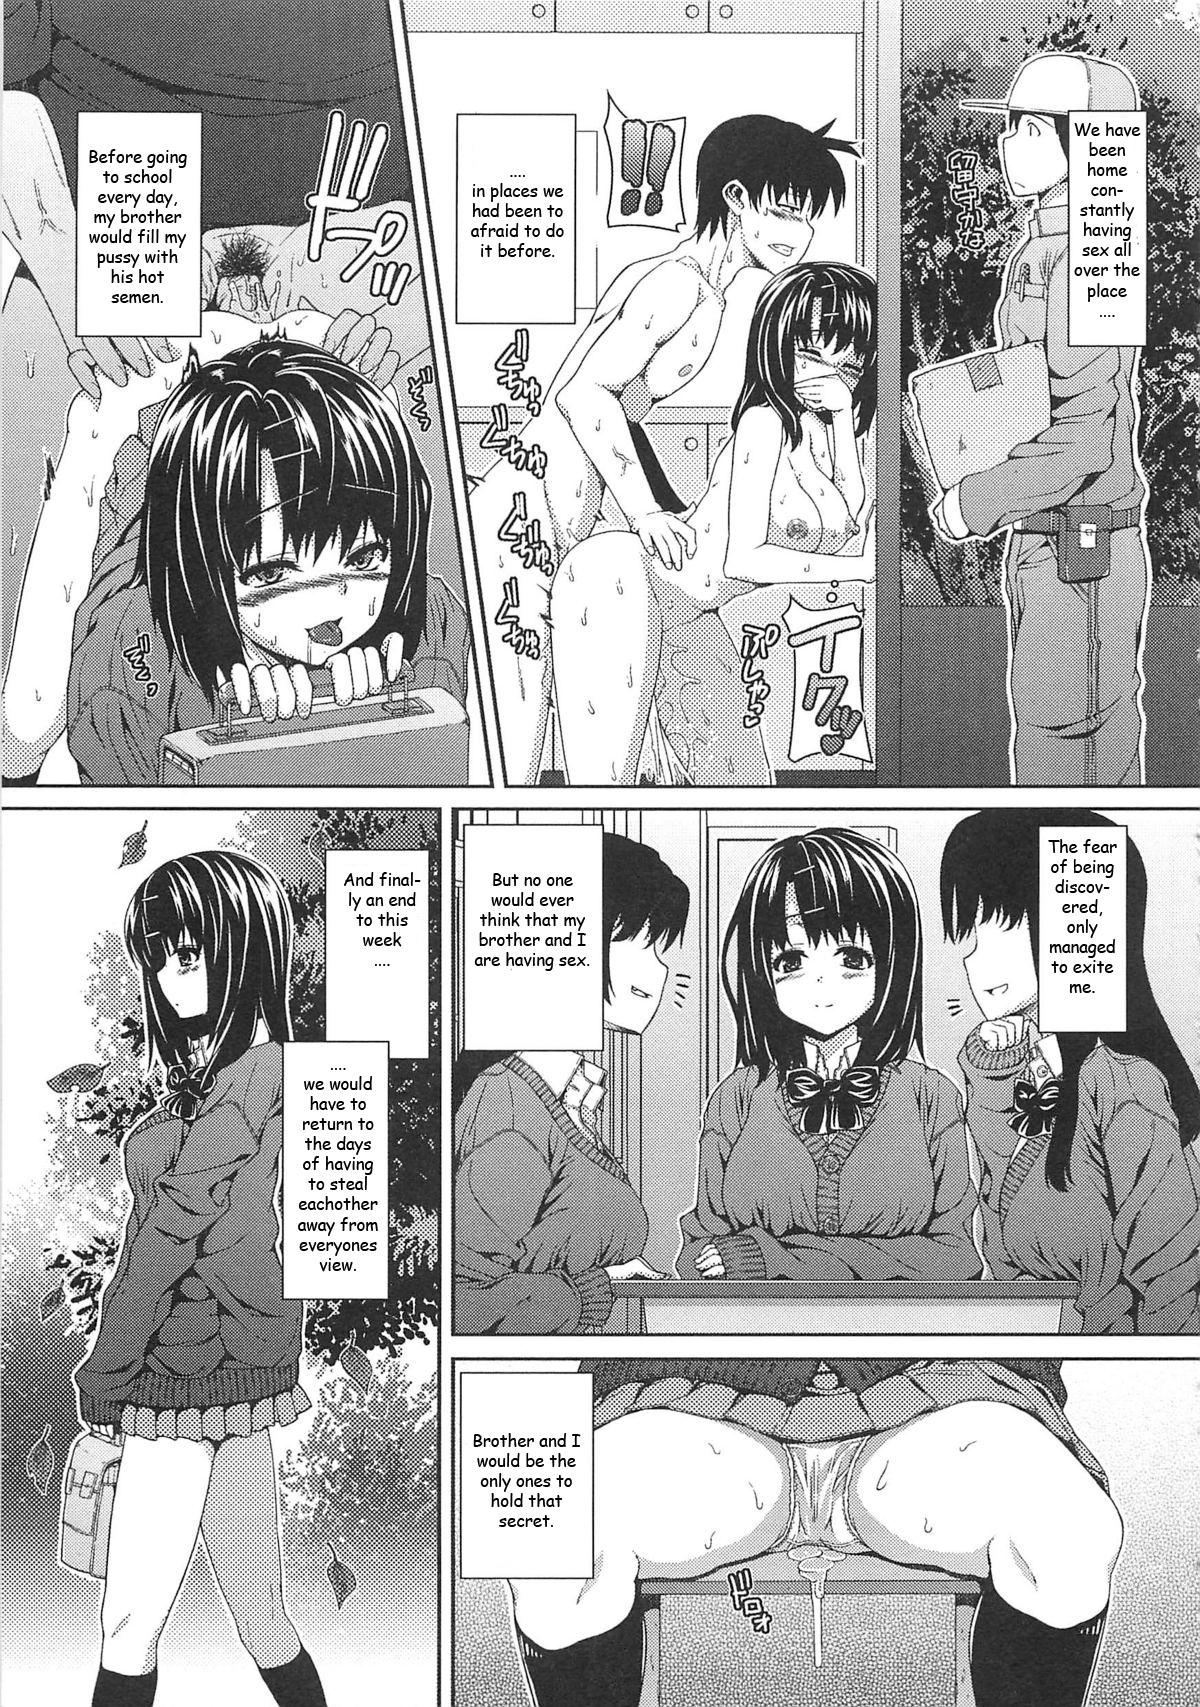 Young Imouto Seven Days Black Dick - Page 9